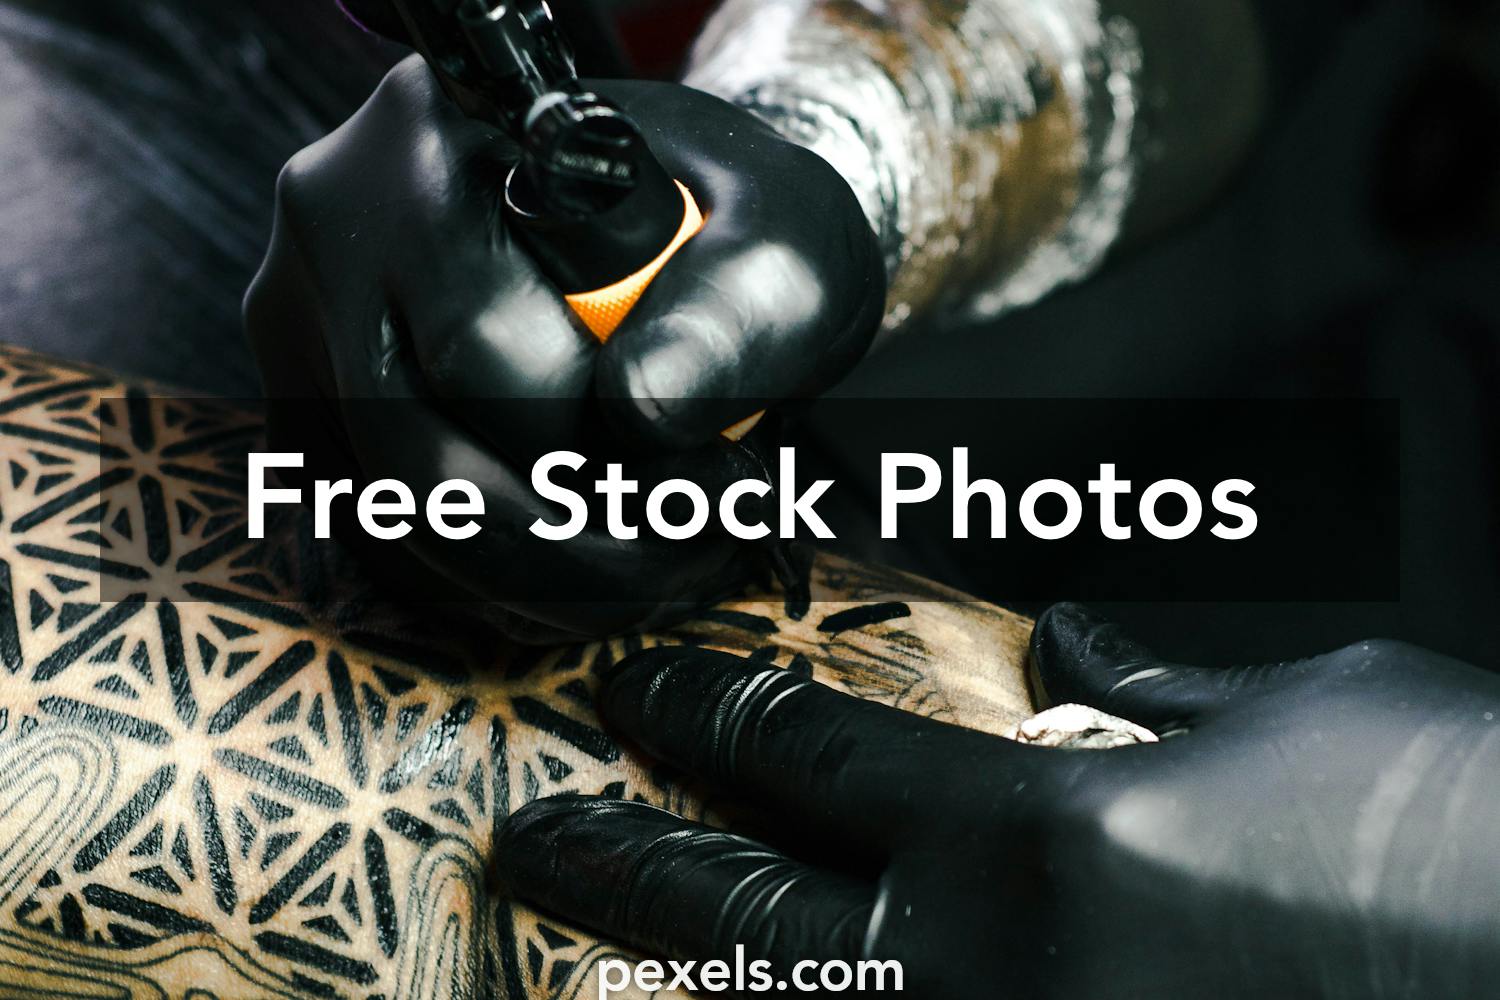 Tattoo Machine Photos, Download The BEST Free Tattoo Machine Stock Photos &  HD Images